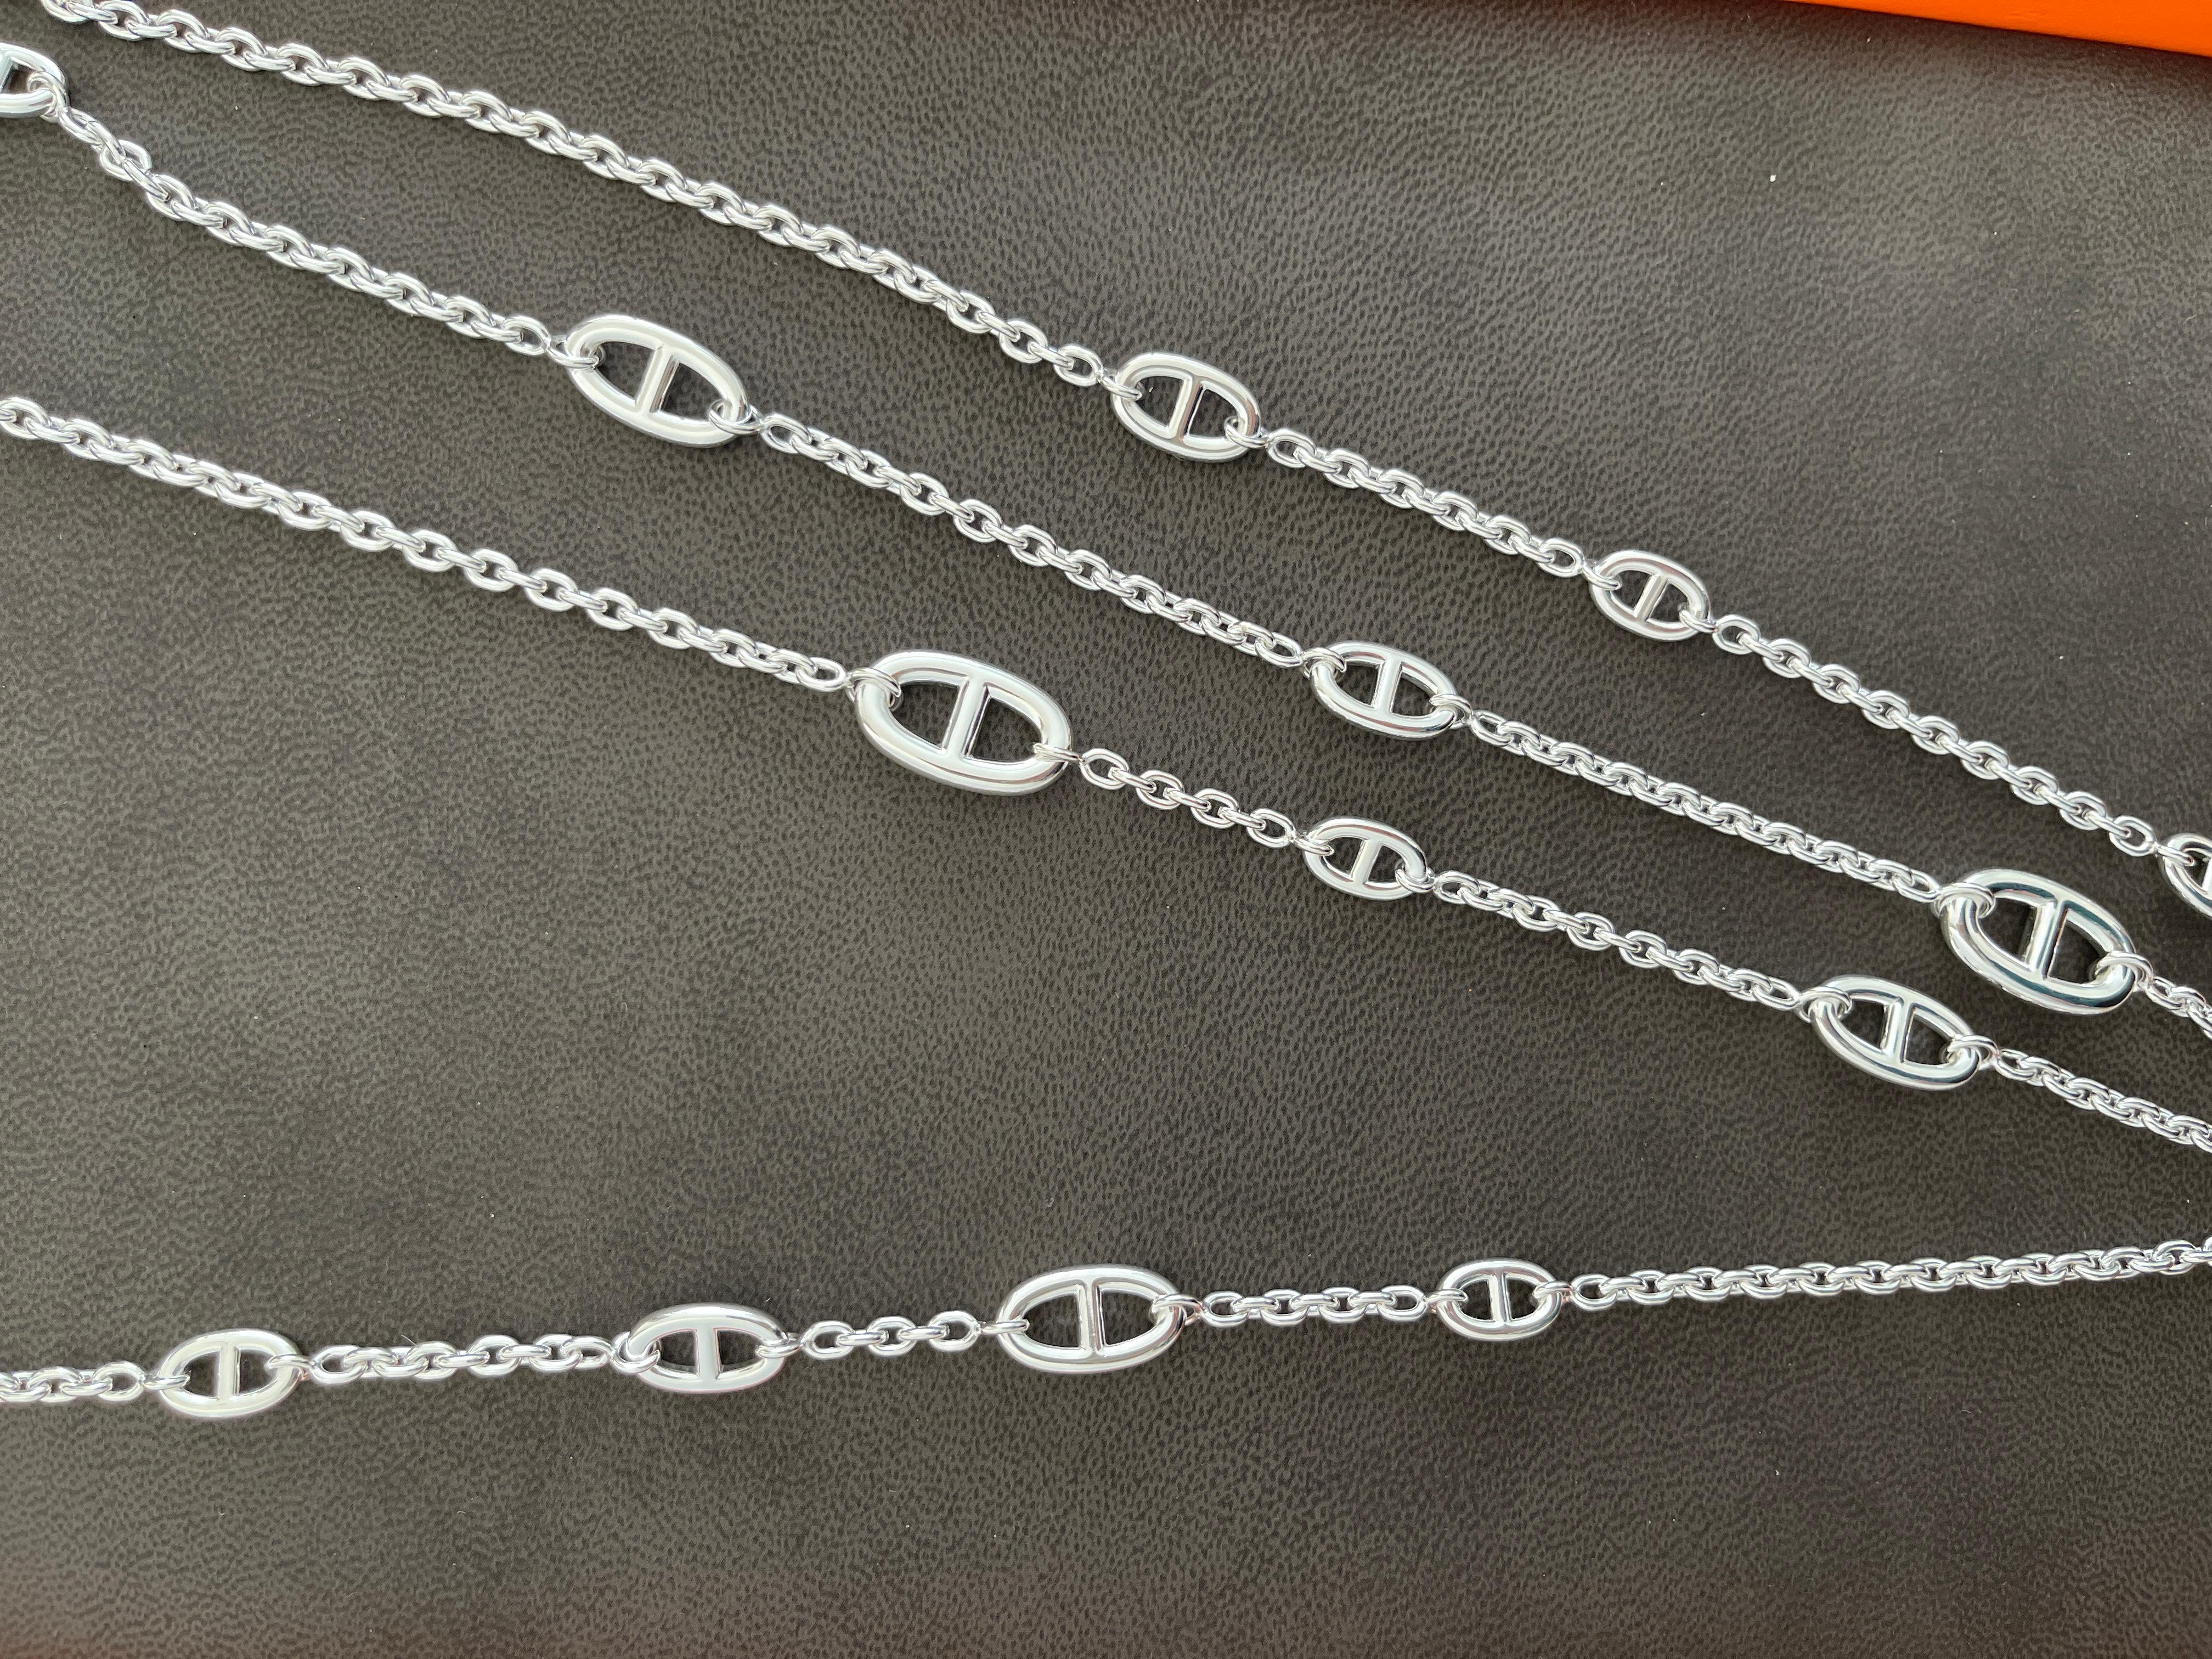 Hermes long necklace in sterling silver
Called the Farandole
Sterling Silver
Length is 63